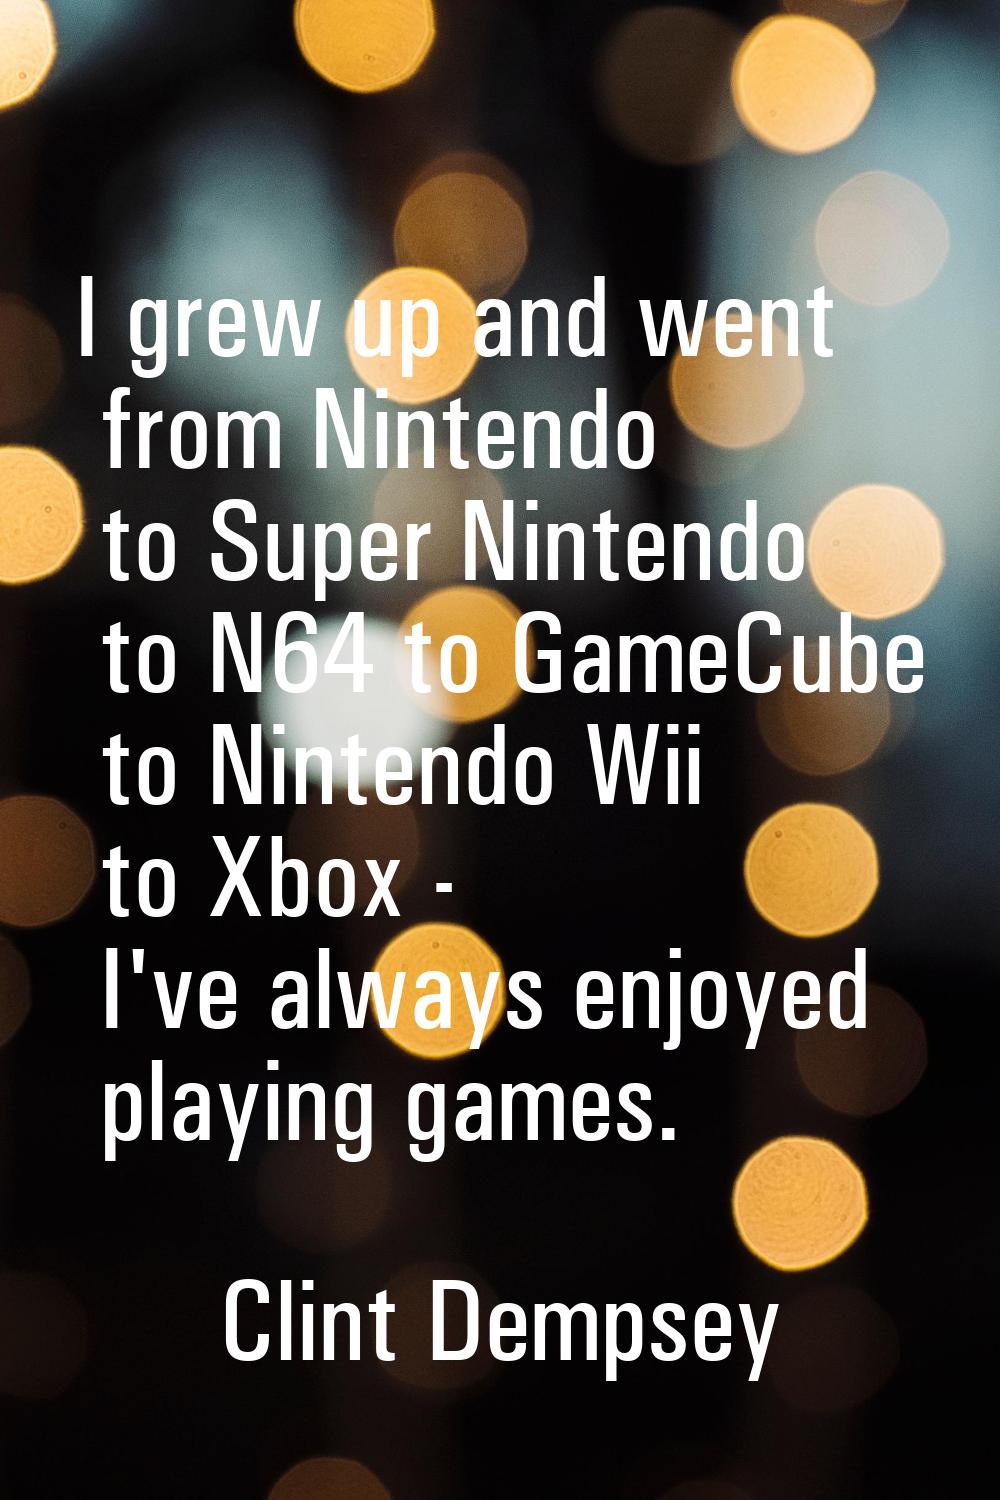 I grew up and went from Nintendo to Super Nintendo to N64 to GameCube to Nintendo Wii to Xbox - I'v